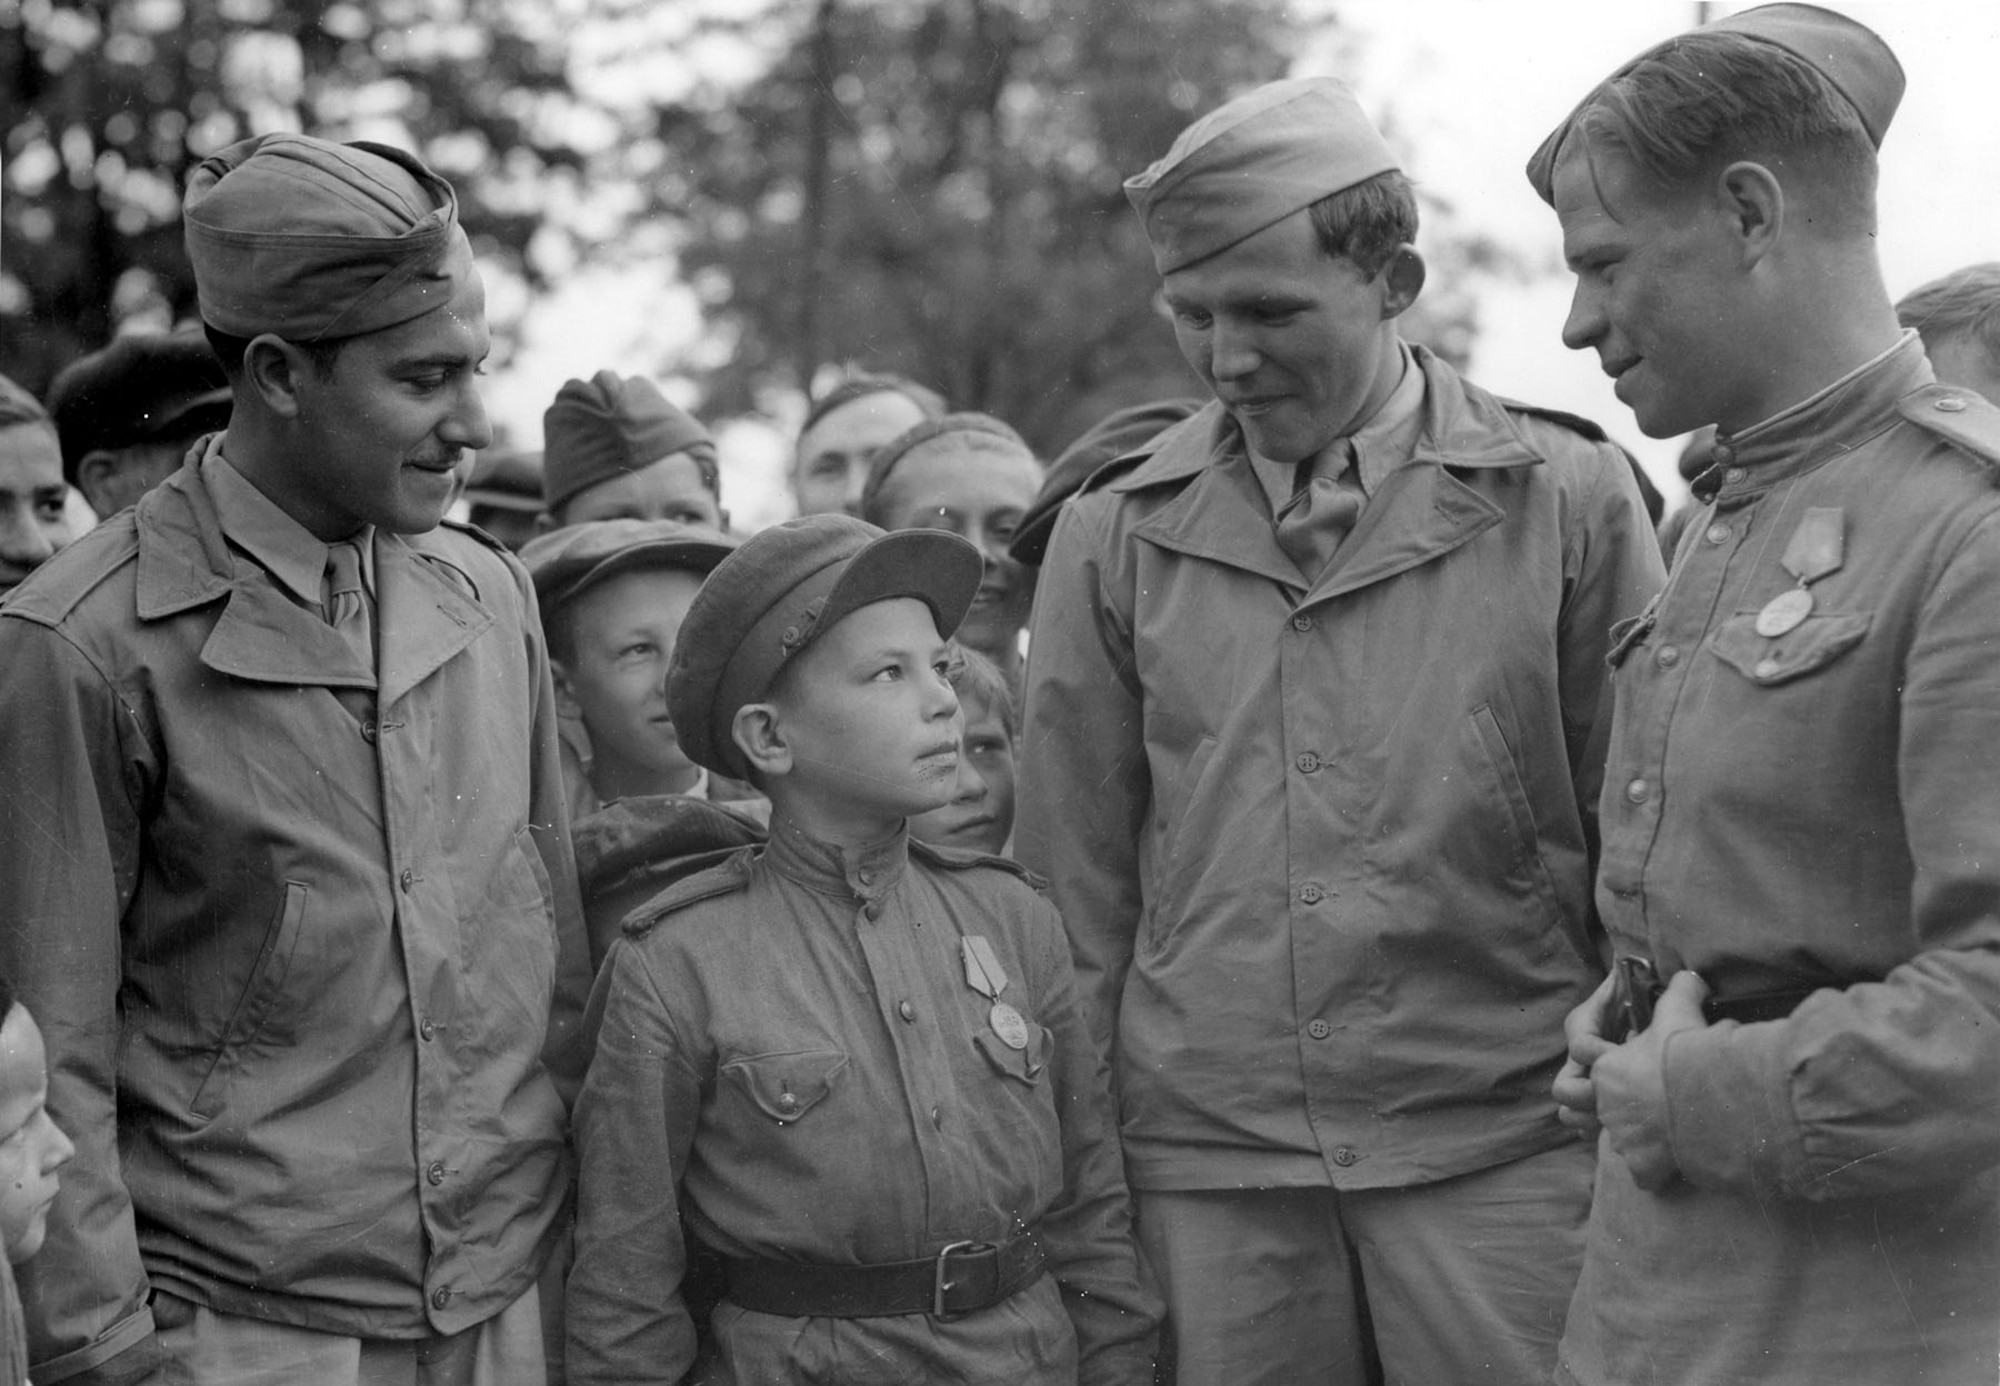 Sgt. S. Weinschenker and TSgt. William Topps talk to a 10-year-old boy who had been in uniform as an A/A loader for three years. (U.S. Air Force photo)